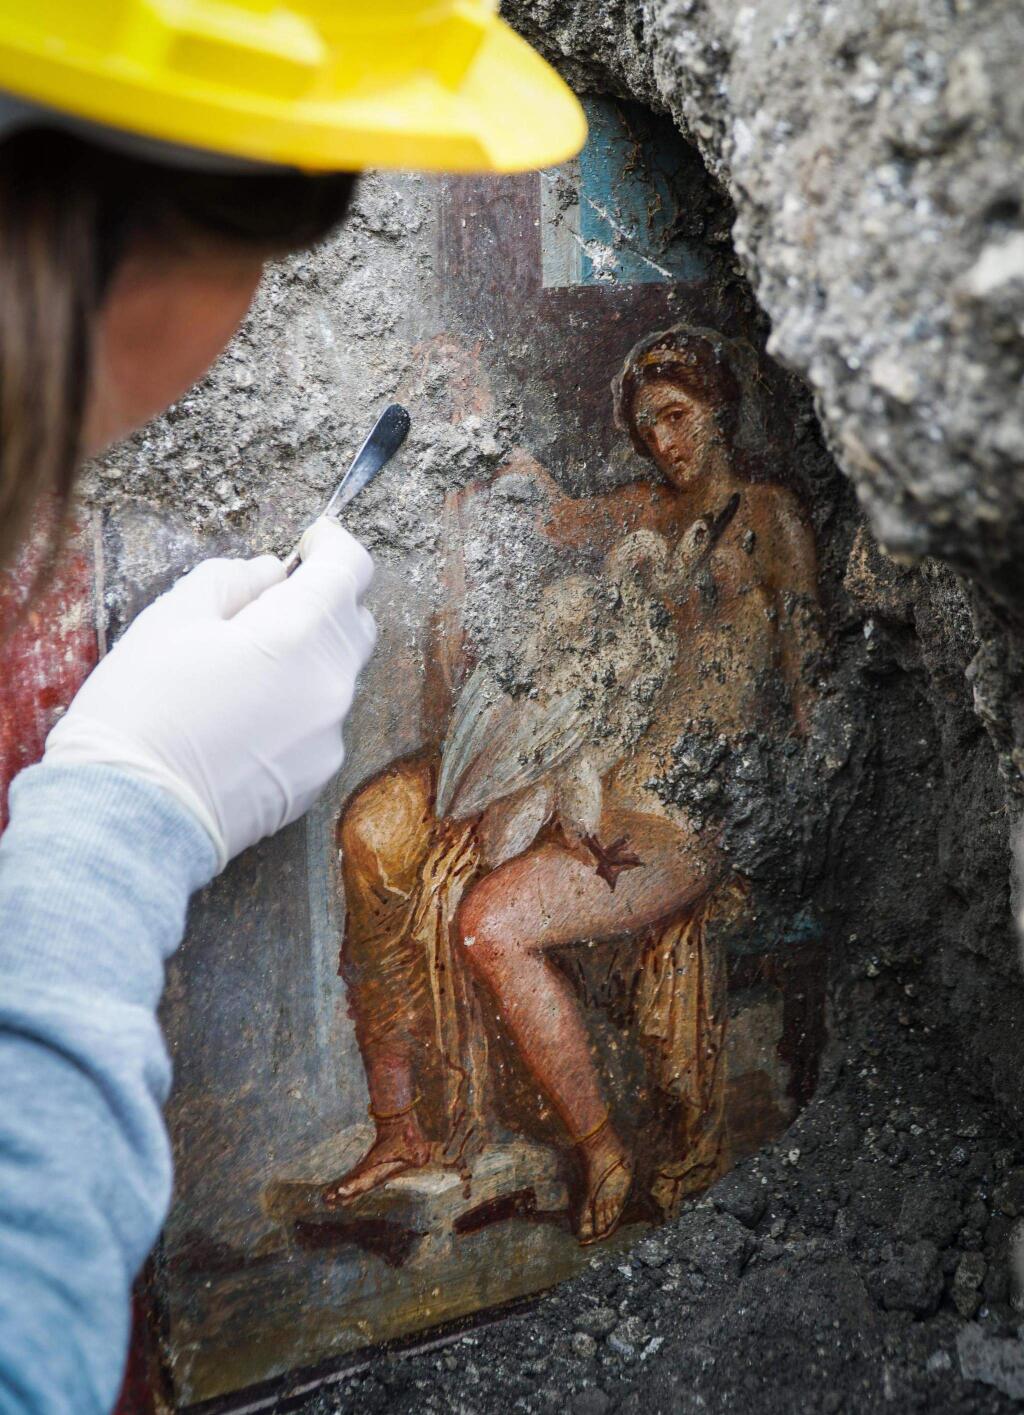 An archeologist cleans up the fresco ''Leda e il cigno'' (Leda and the swan) discovered last Friday in the Regio V archeological area in Pompeii, near Naples, Italy, Monday, Nov. 19, 2018. The fresco depicts a story and art subject of Greek mythology, with Queen of Sparta Leda being impregnated by Zeus - Jupiter in Roman mythology - in the form of a swan. (Cesare Abbate/ANSA via AP)